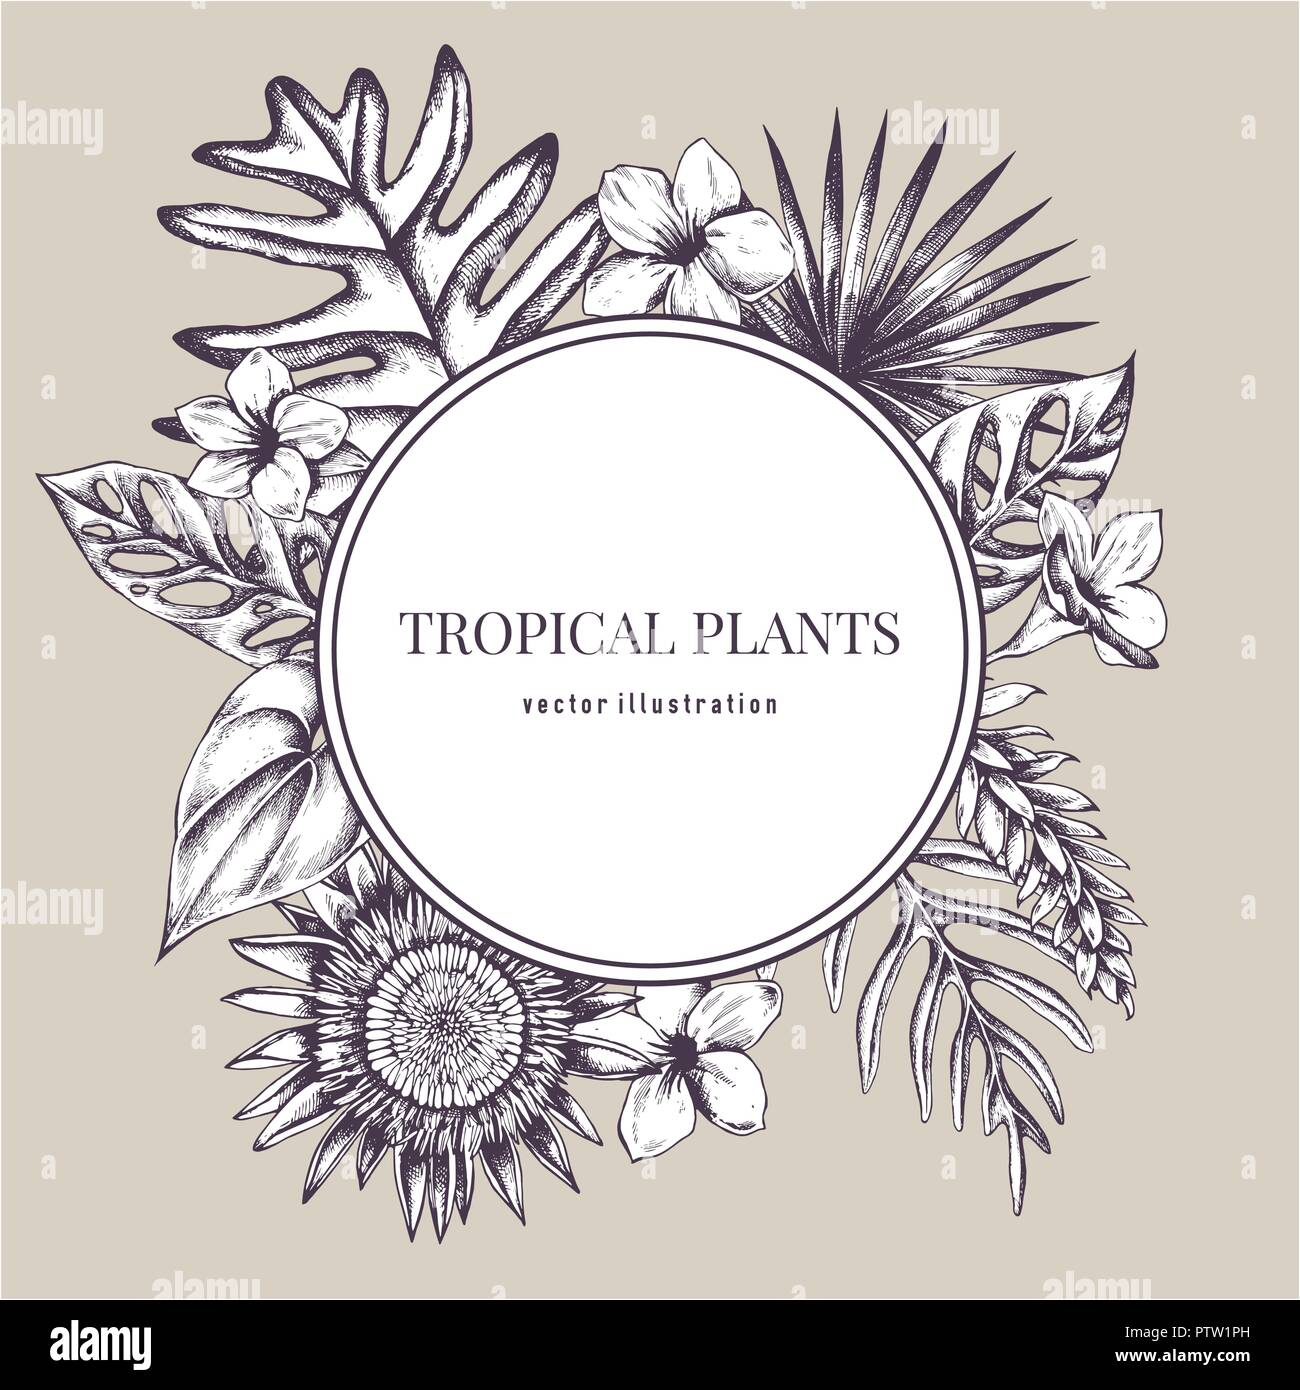 Round paper emblem over tropical plants. Hand drawn vector illustration Stock Vector